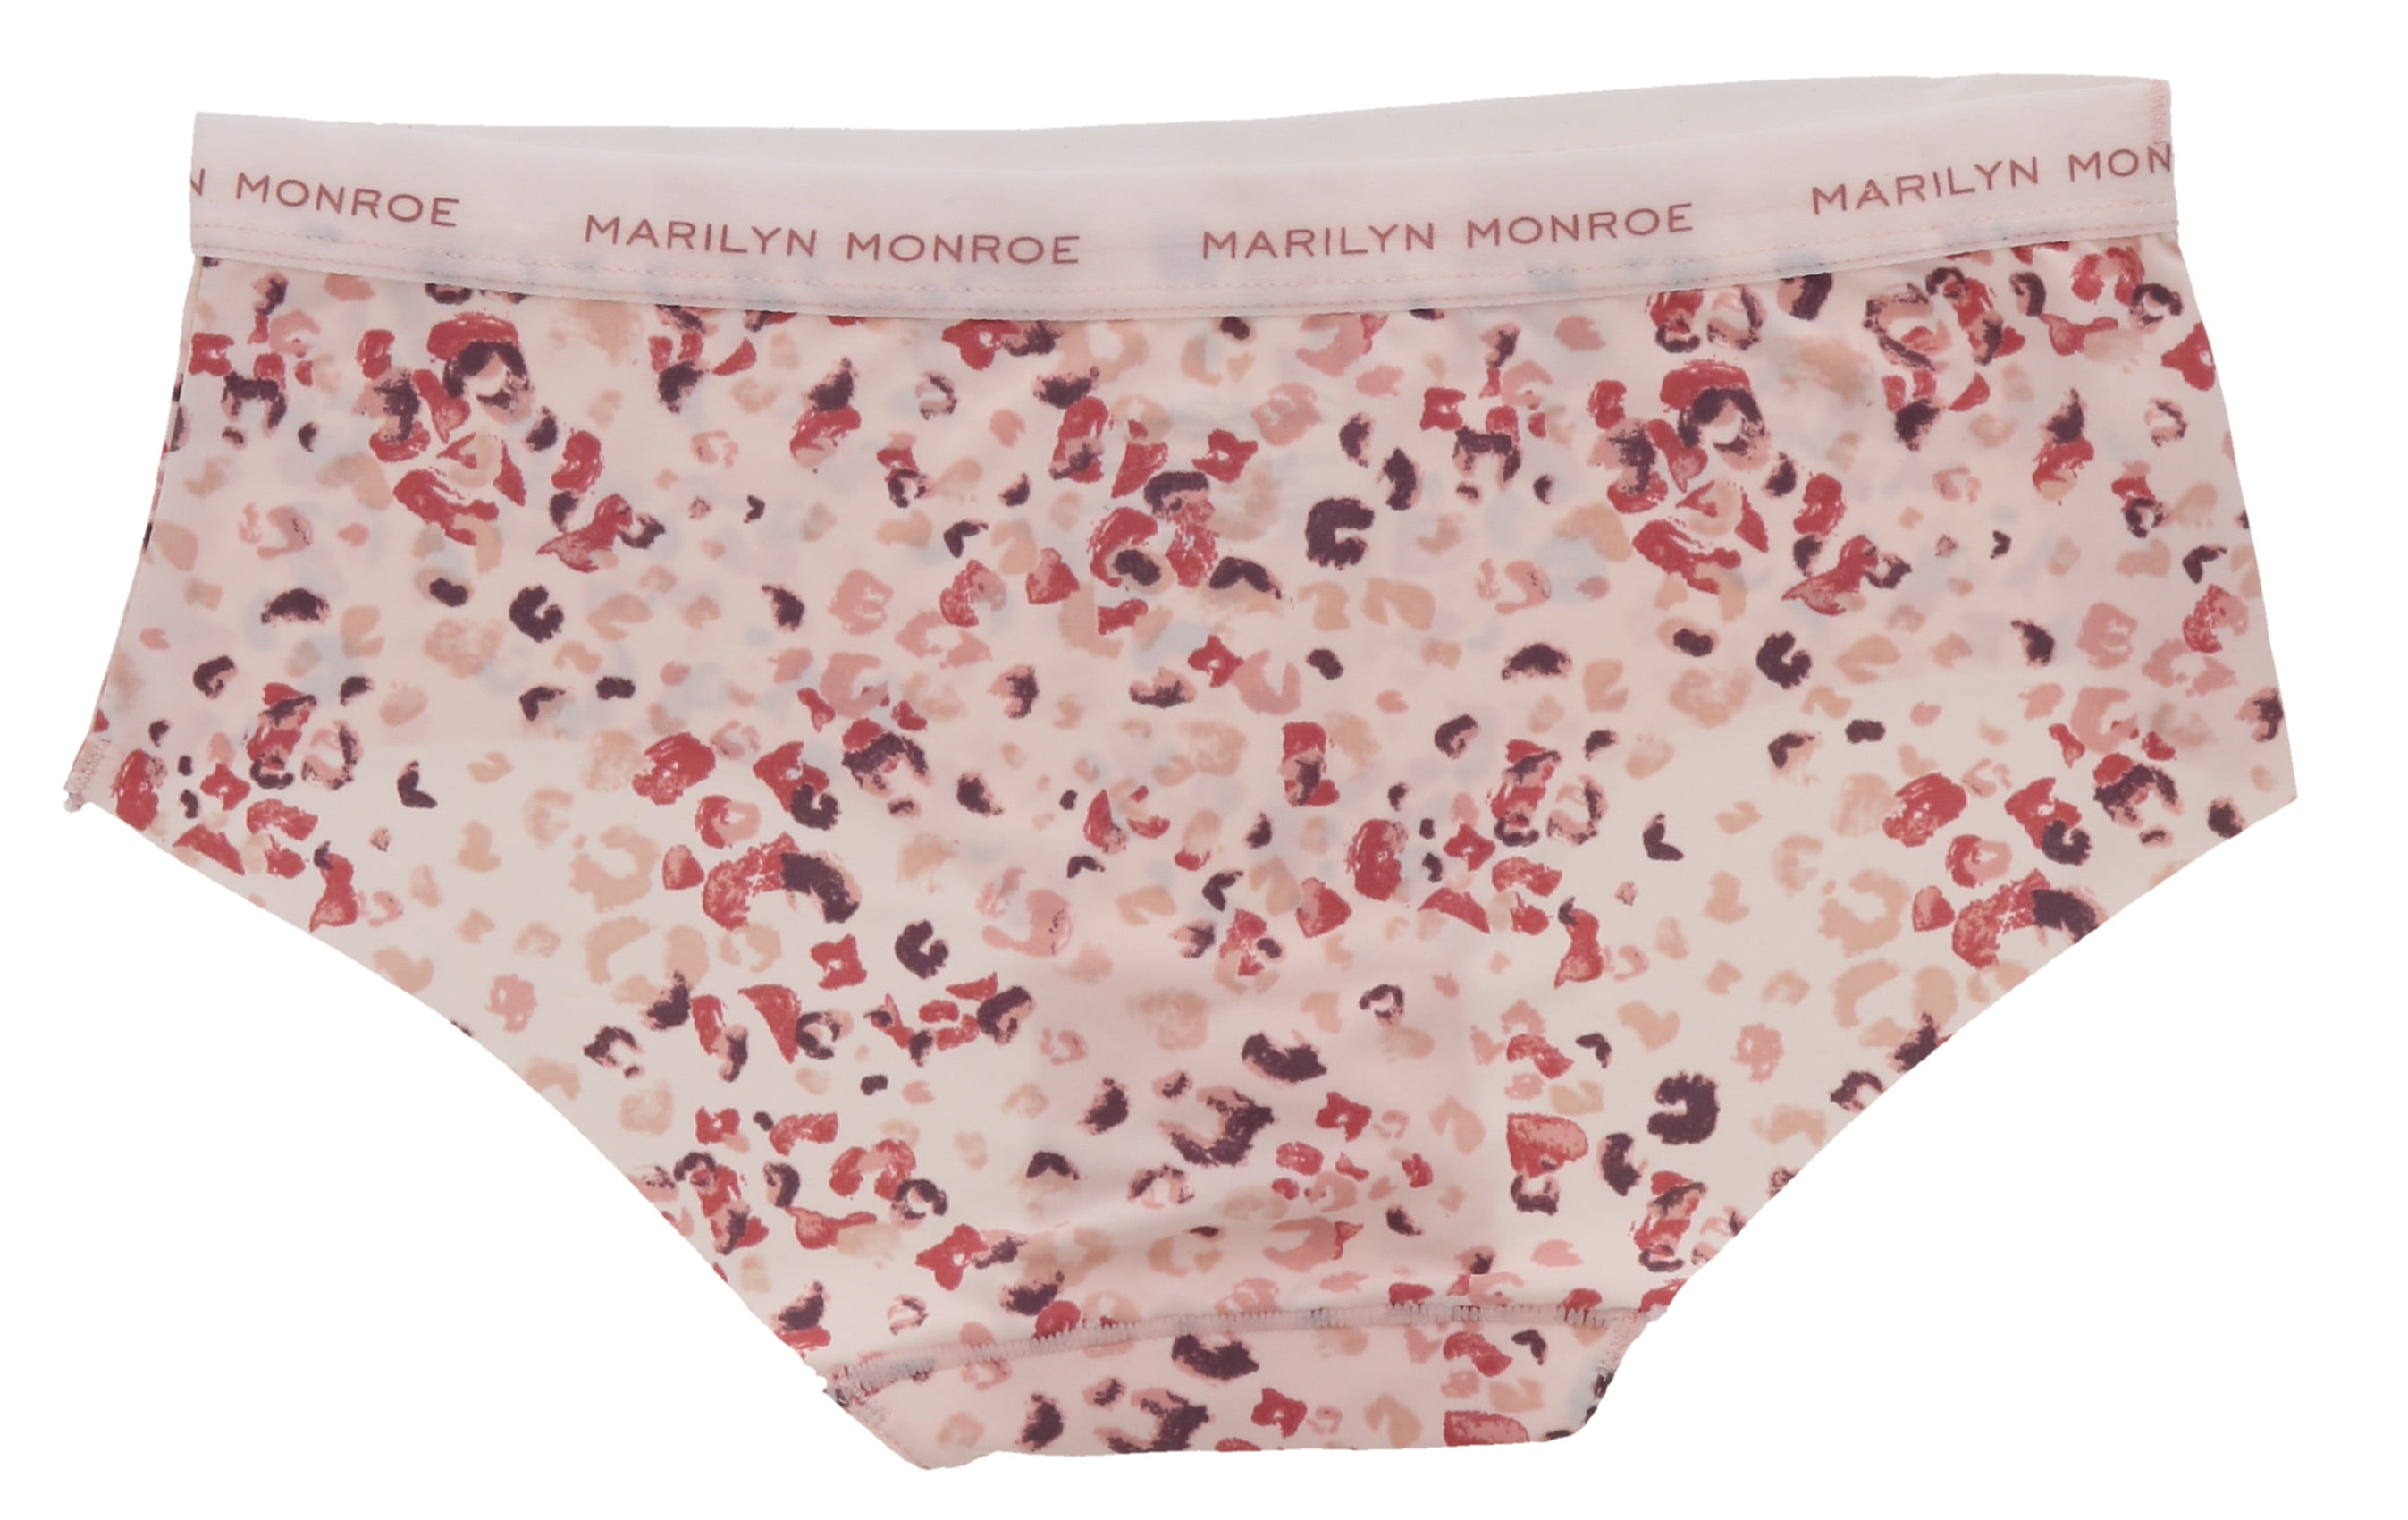 Marilyn Monroe Women's Seamless Sports Band Hipster Panties 5 Pack - Pink &  Mauve Animal Print - Small 